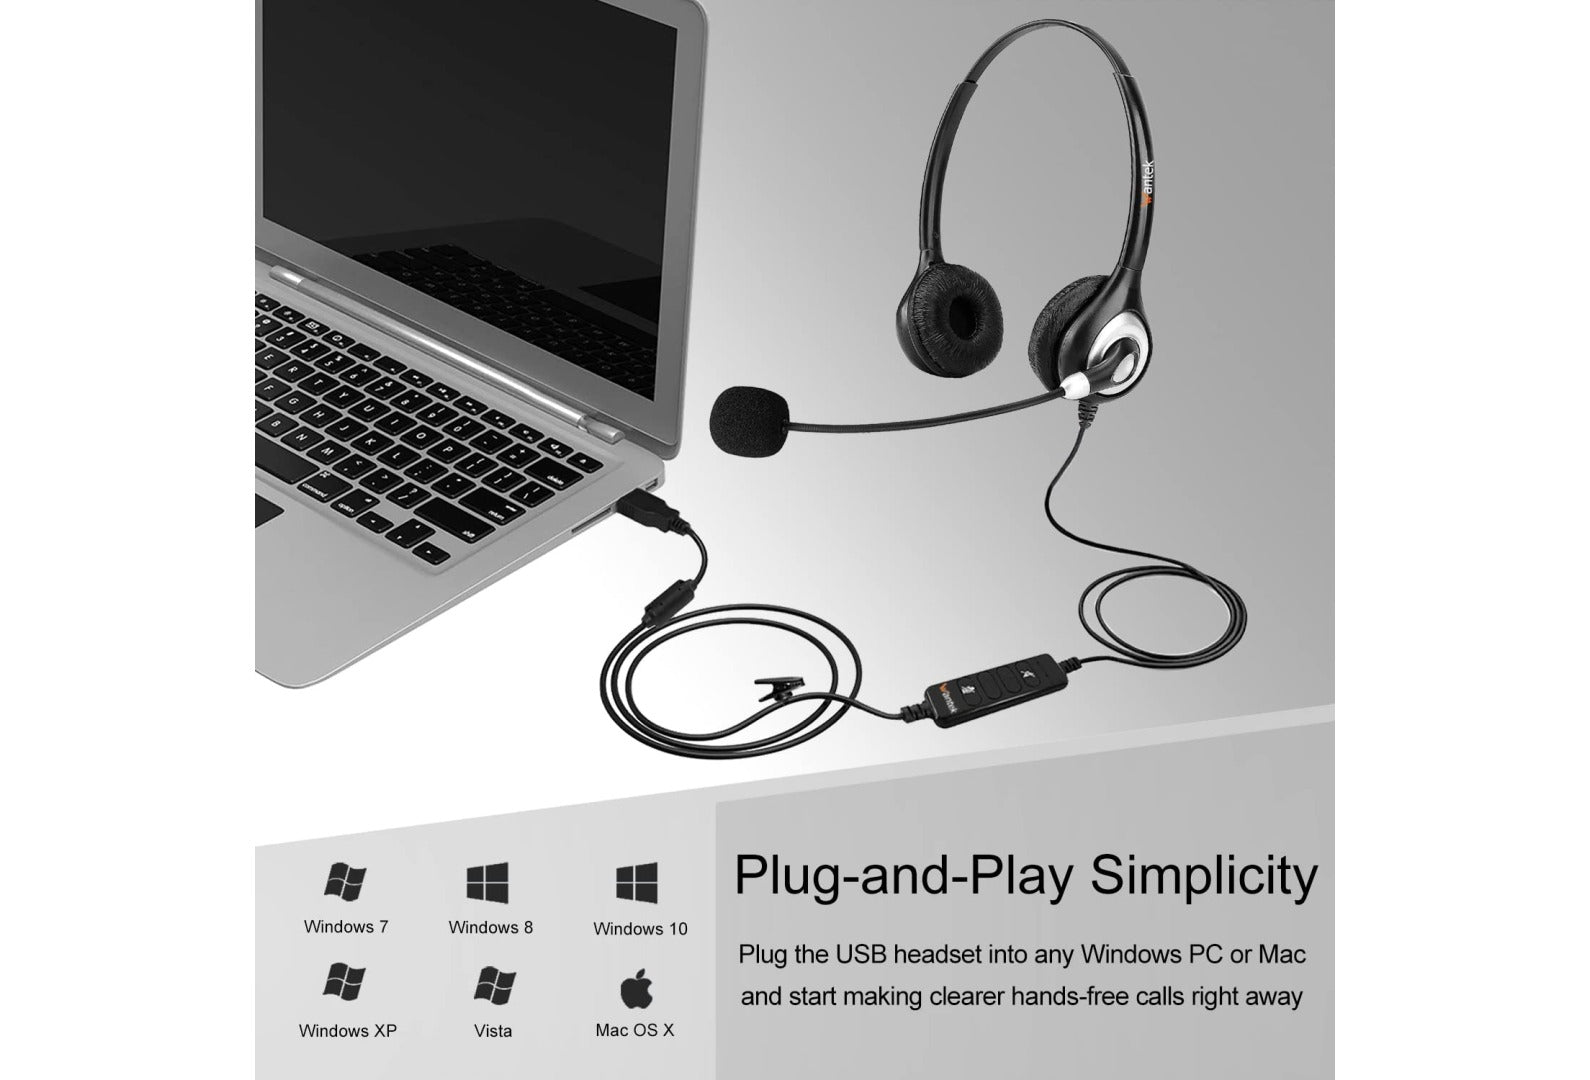 USB Headset with Microphone Noise Cancelling and in-line Controls